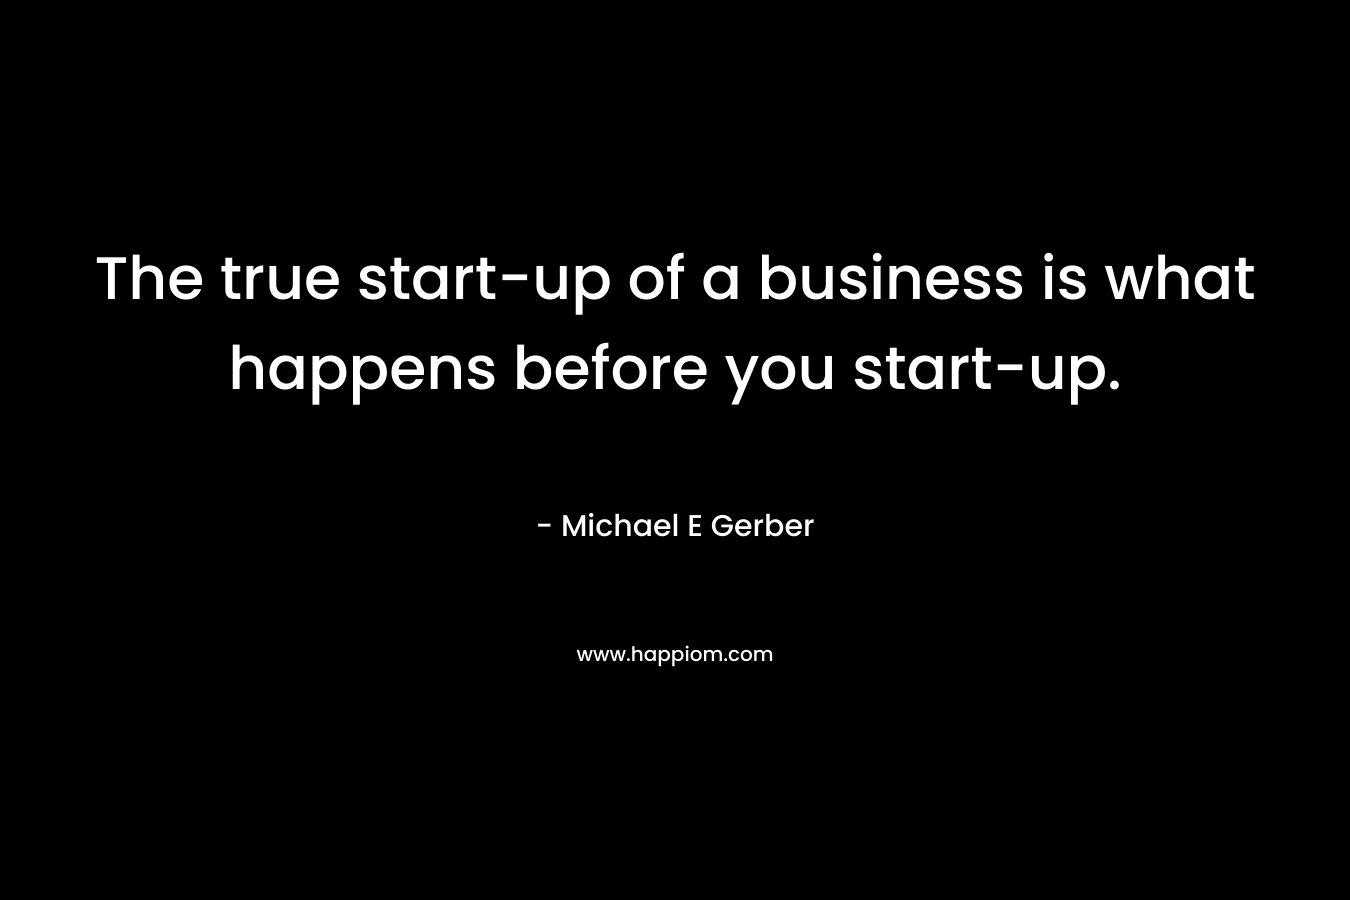 The true start-up of a business is what happens before you start-up.